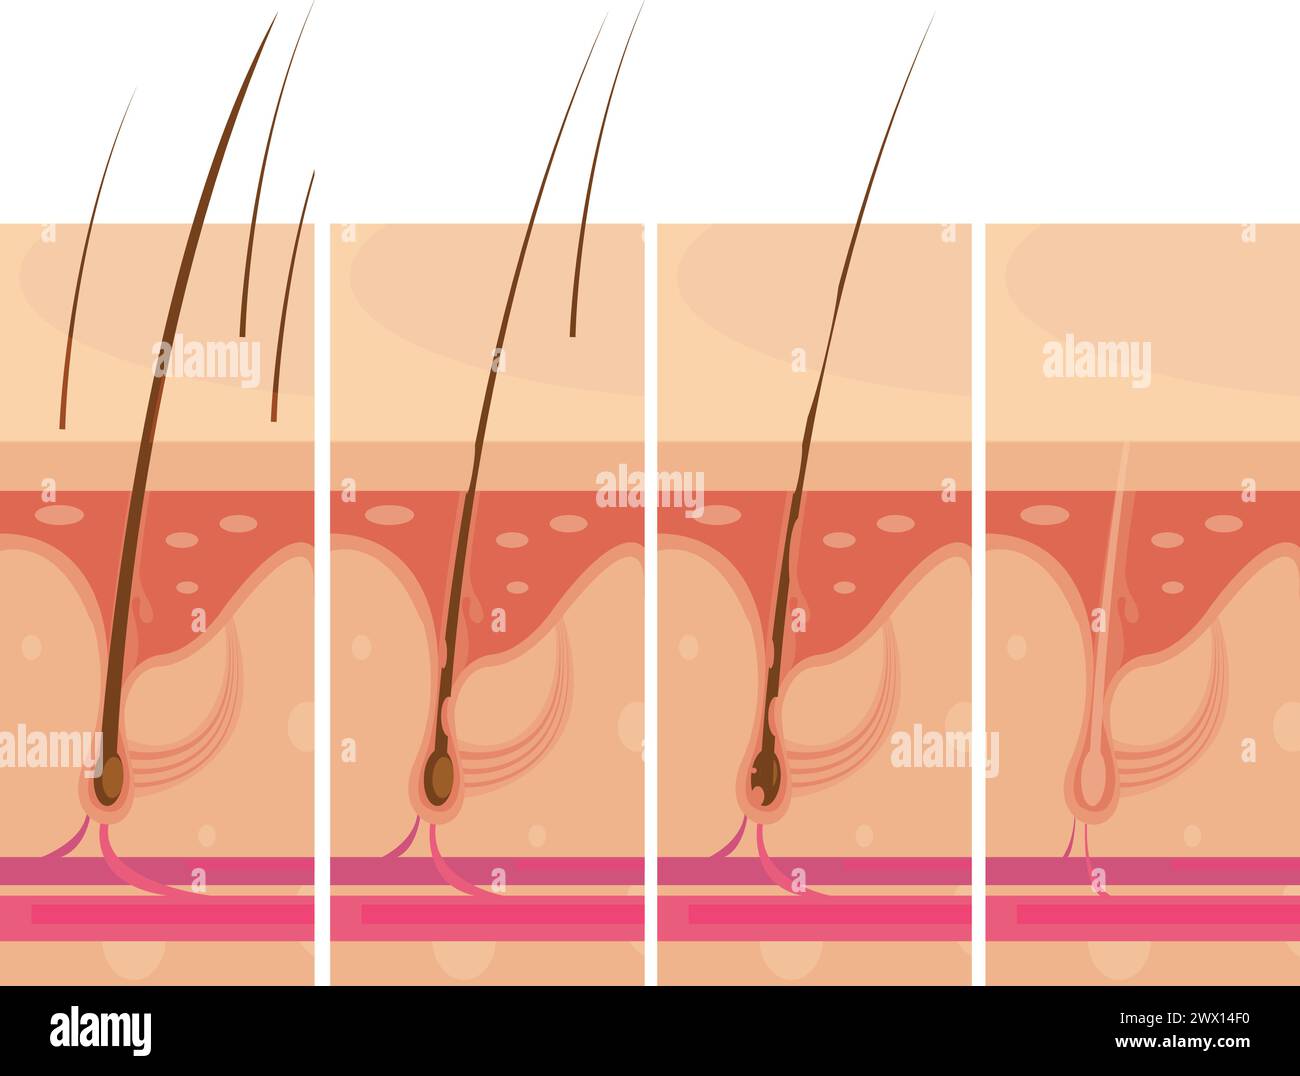 Hair loss storyboard conceptual compositions set with profile macro view of balding scalp skin infographic images vector illustration Stock Vector